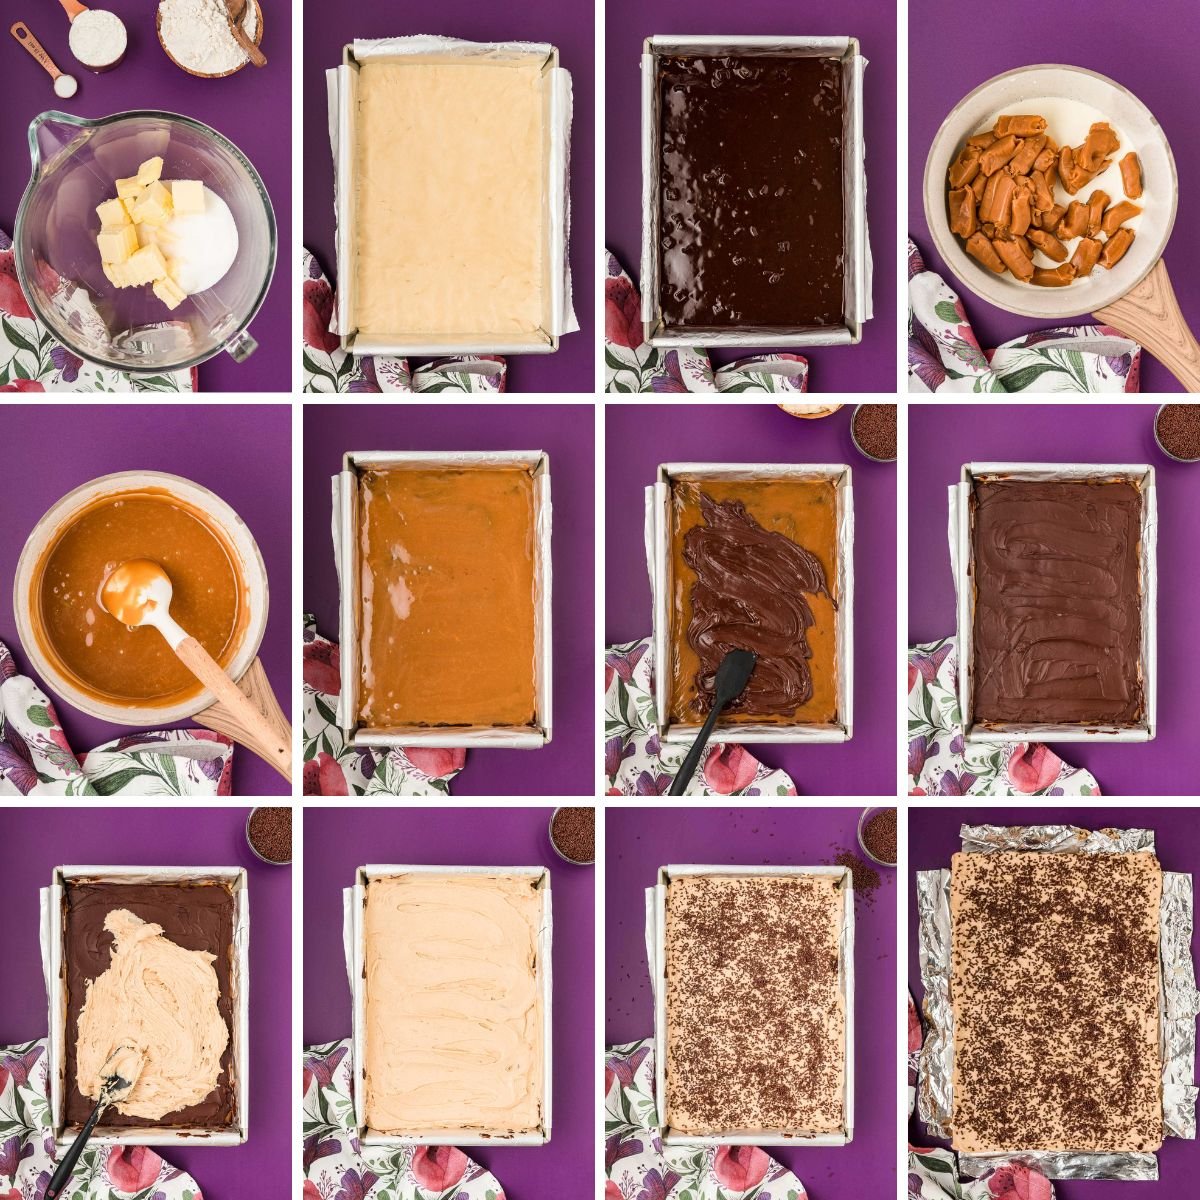 Step by step photo collage showing how to make Billionaire Bars.